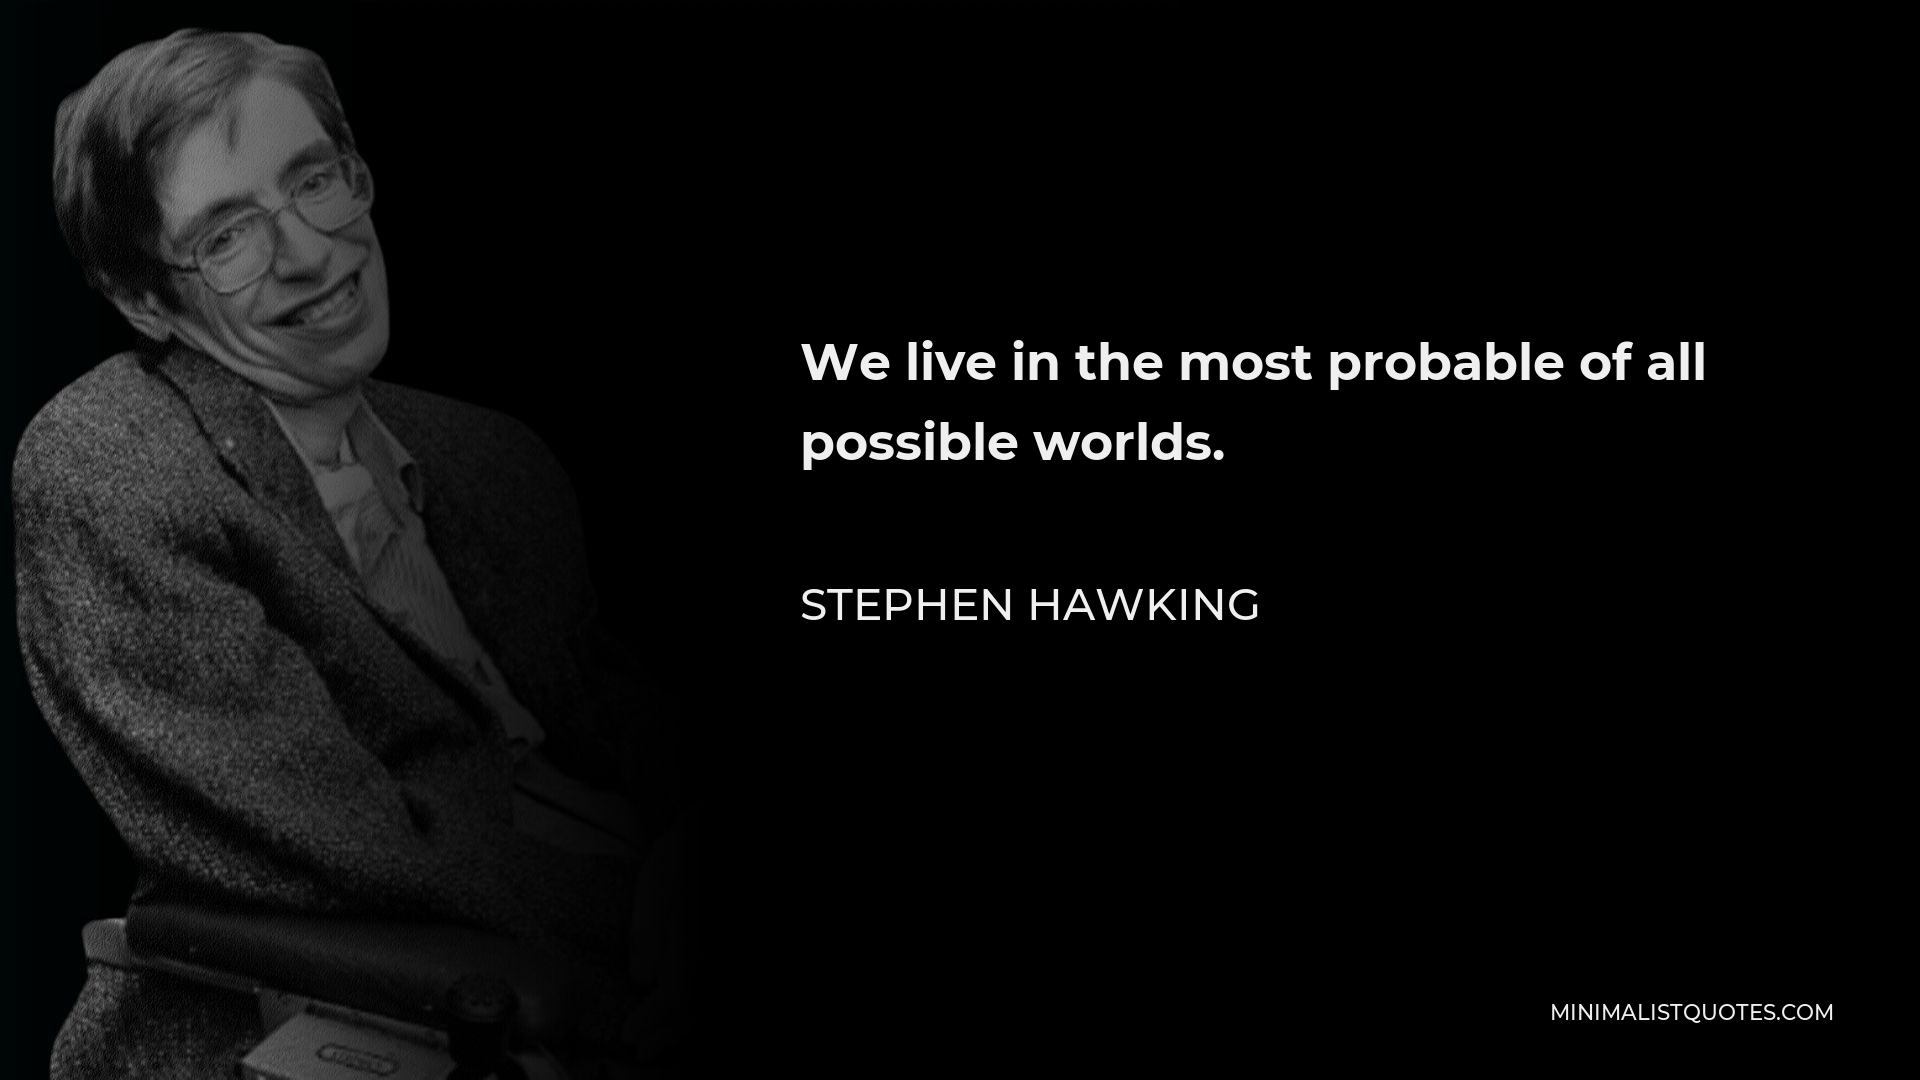 Stephen Hawking Quote - We live in the most probable of all possible worlds.